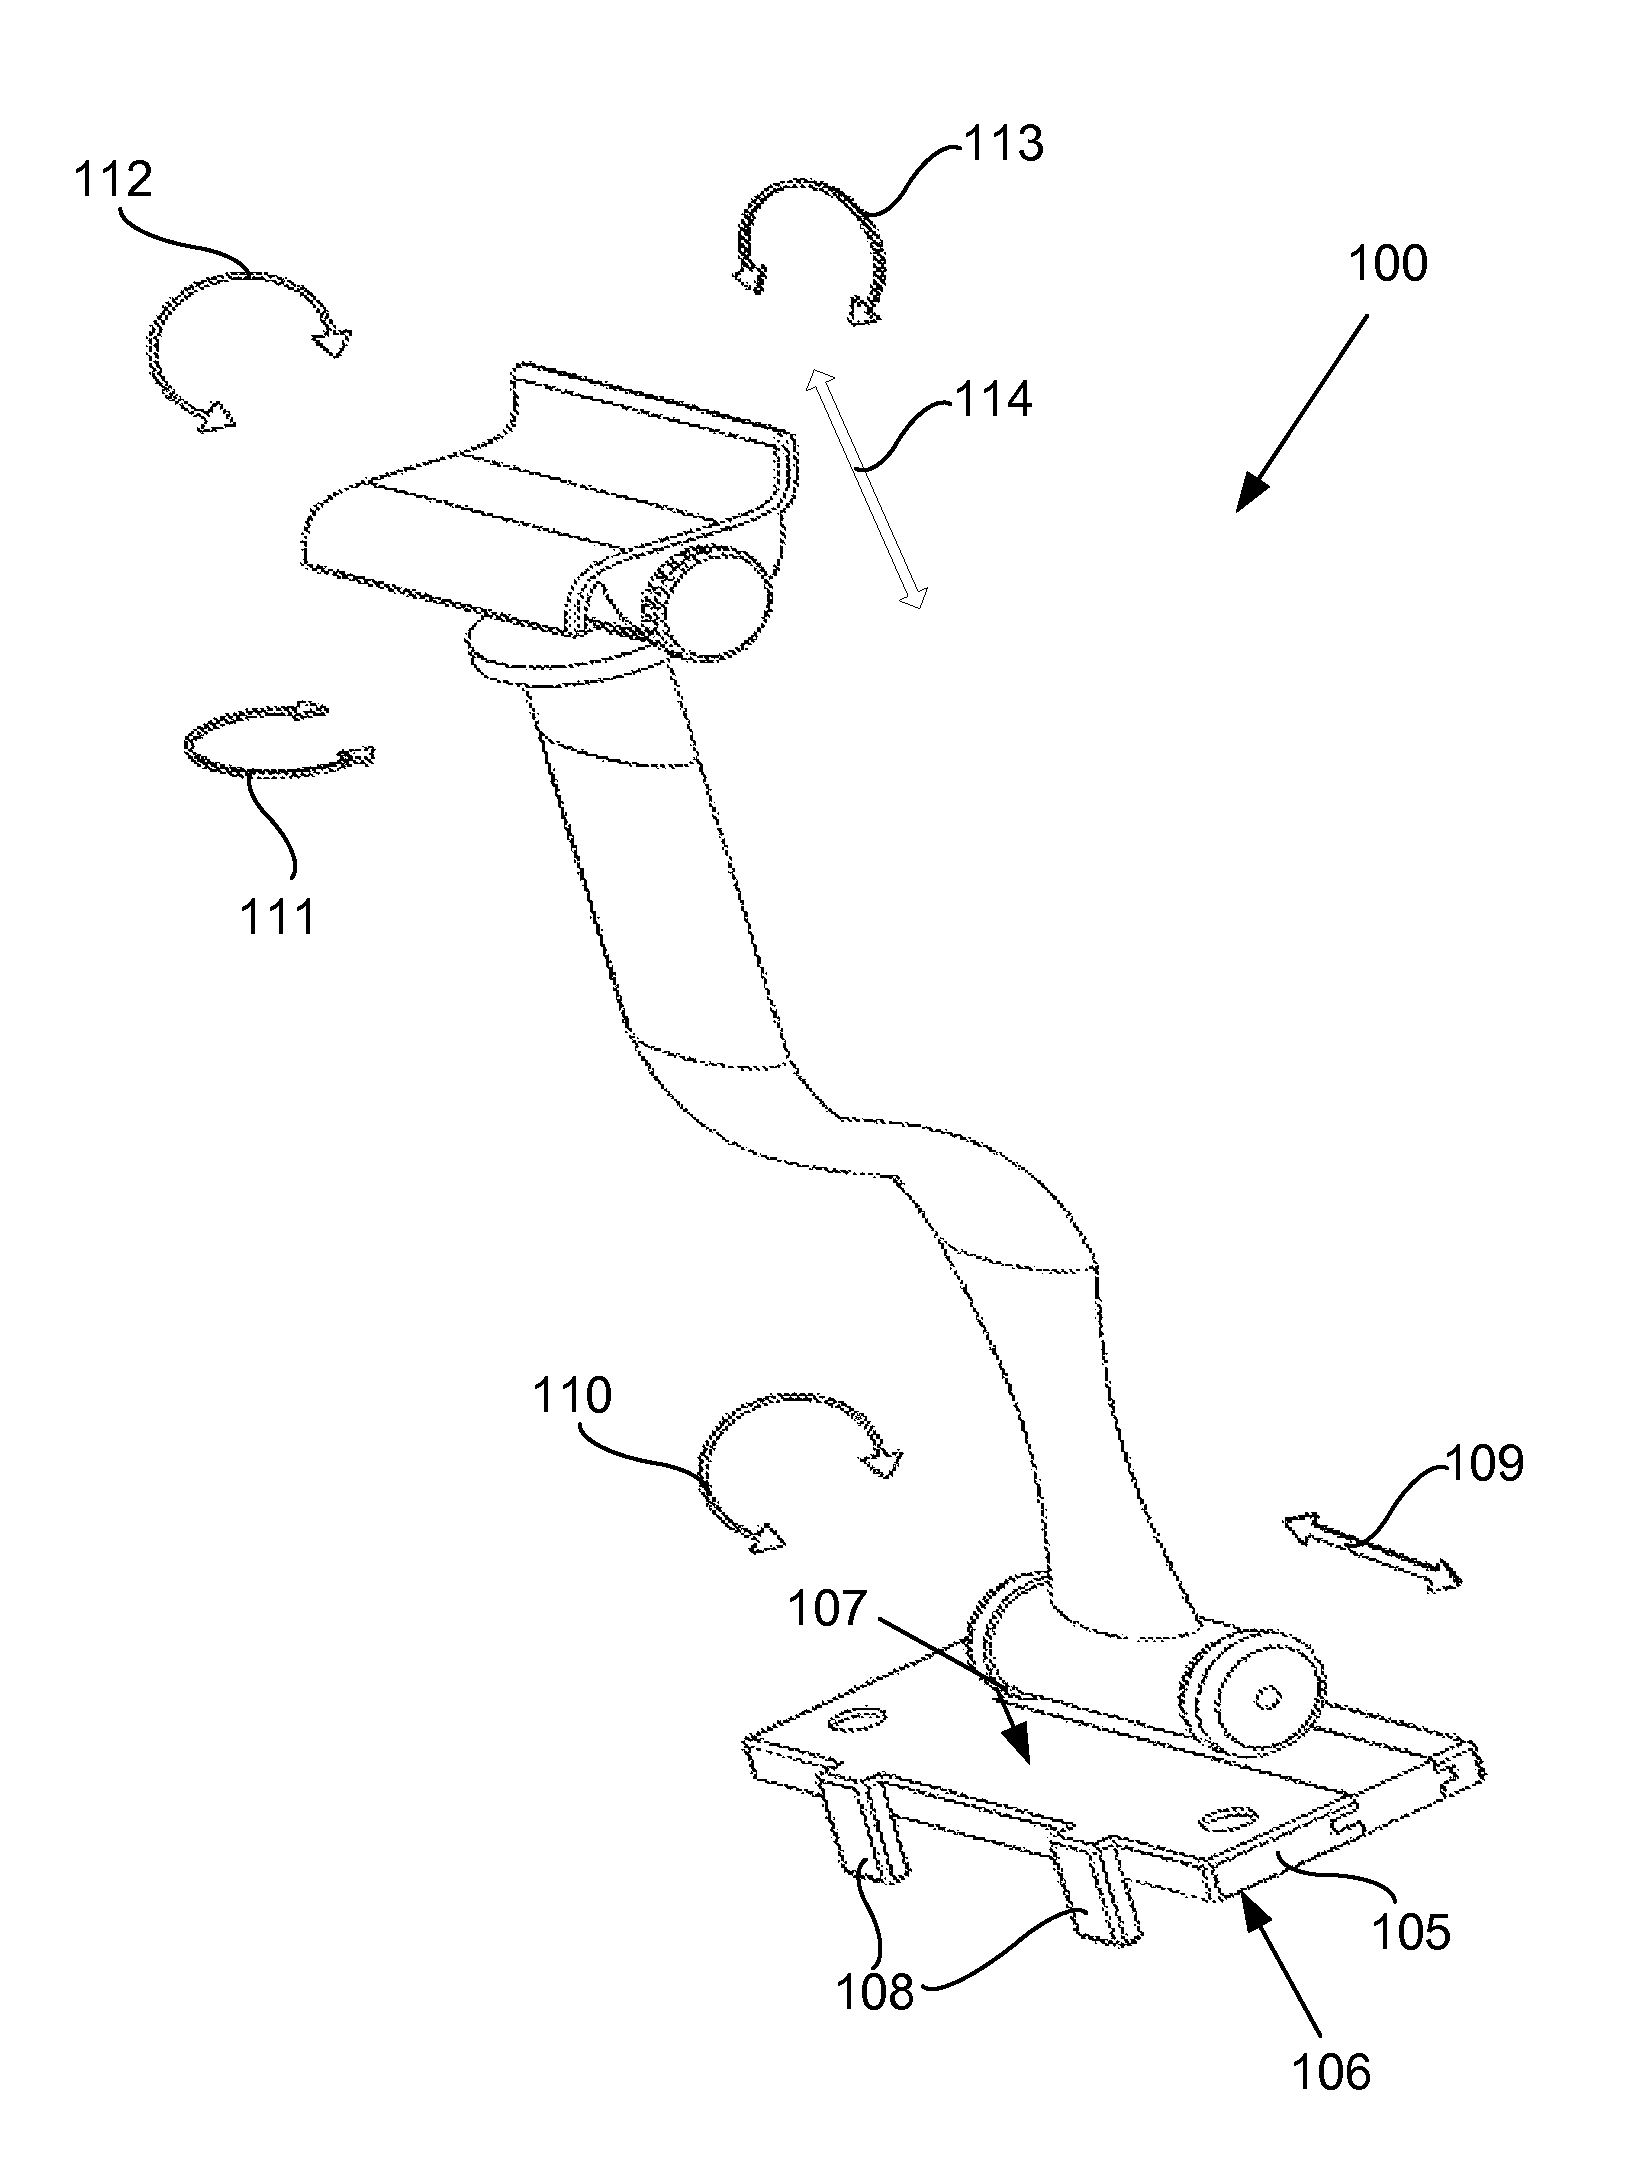 Head and neck support for a seated person